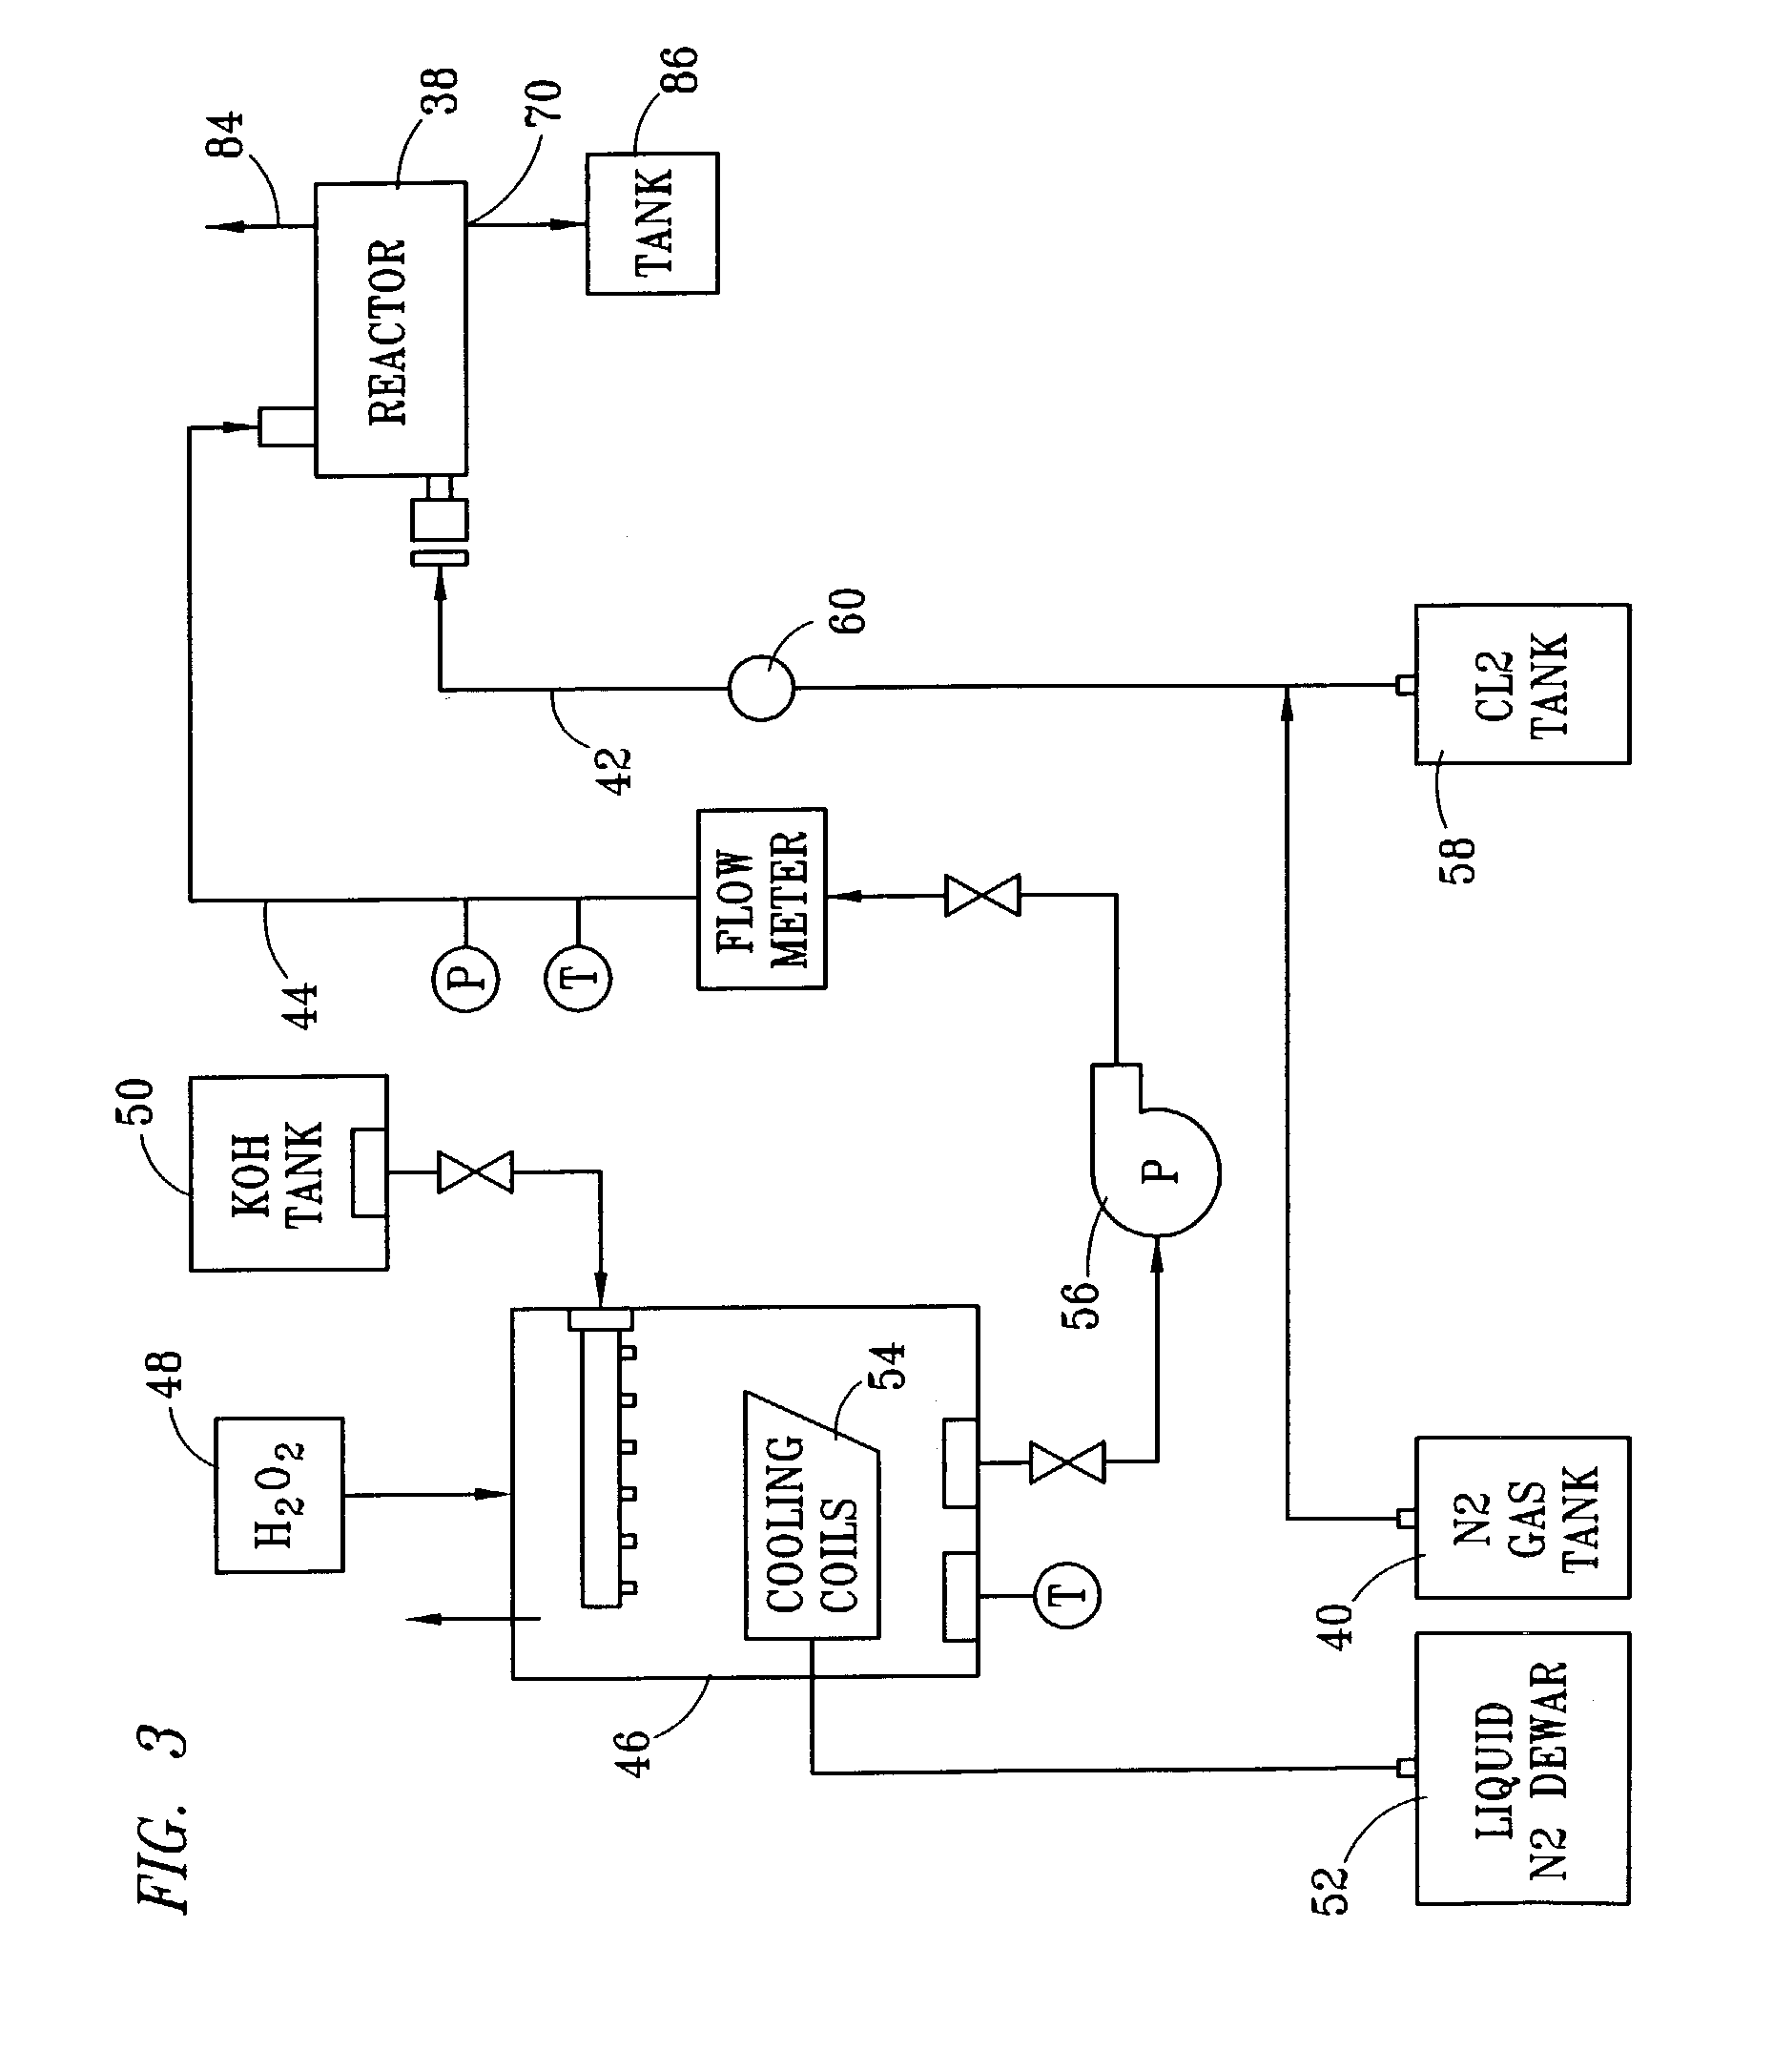 Efficient method and apparatus for generating singlet delta oxygen at an elevated pressure